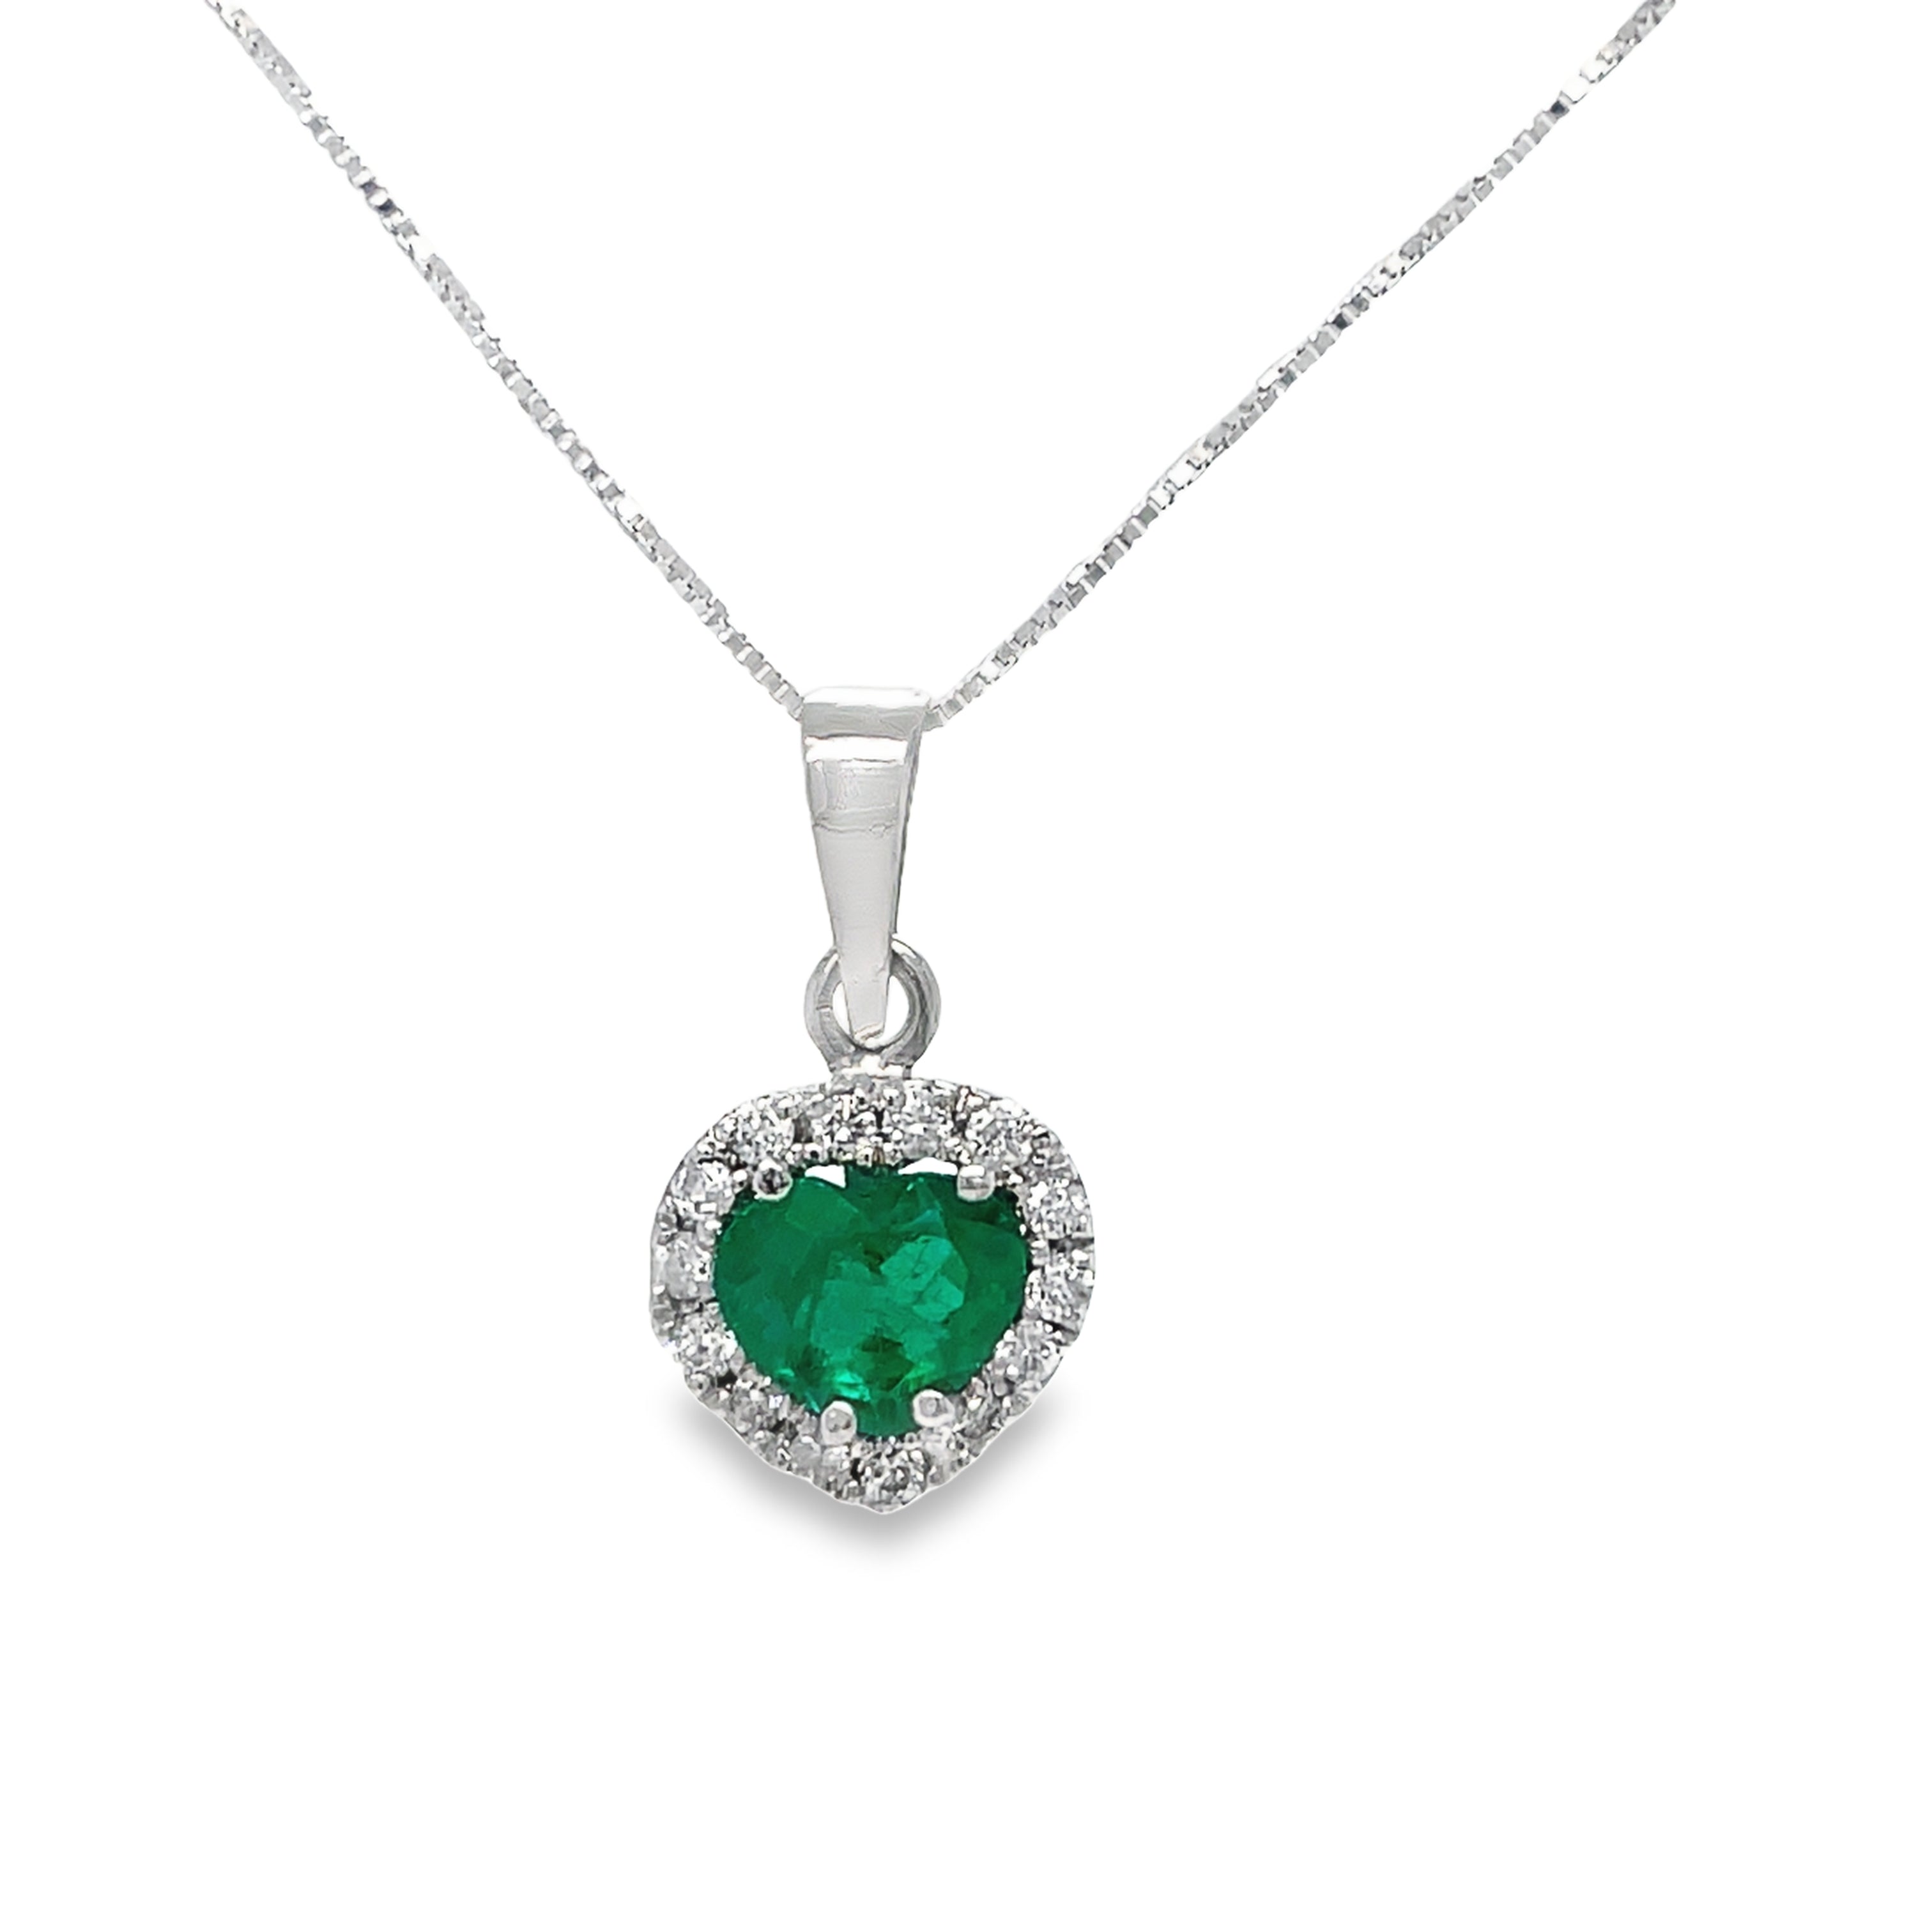 Elevate your love with our Small Solitaire Heart Shape Emerald &amp; Diamond Pendant Necklace. The vibrant heart-shaped Colombian emerald, set in 18K yellow gold, symbolizes passion and devotion. Adorned with a cluster of sparkling round diamonds (0.22 cts), this necklace is a perfect gift for your Valentine. 18" long.